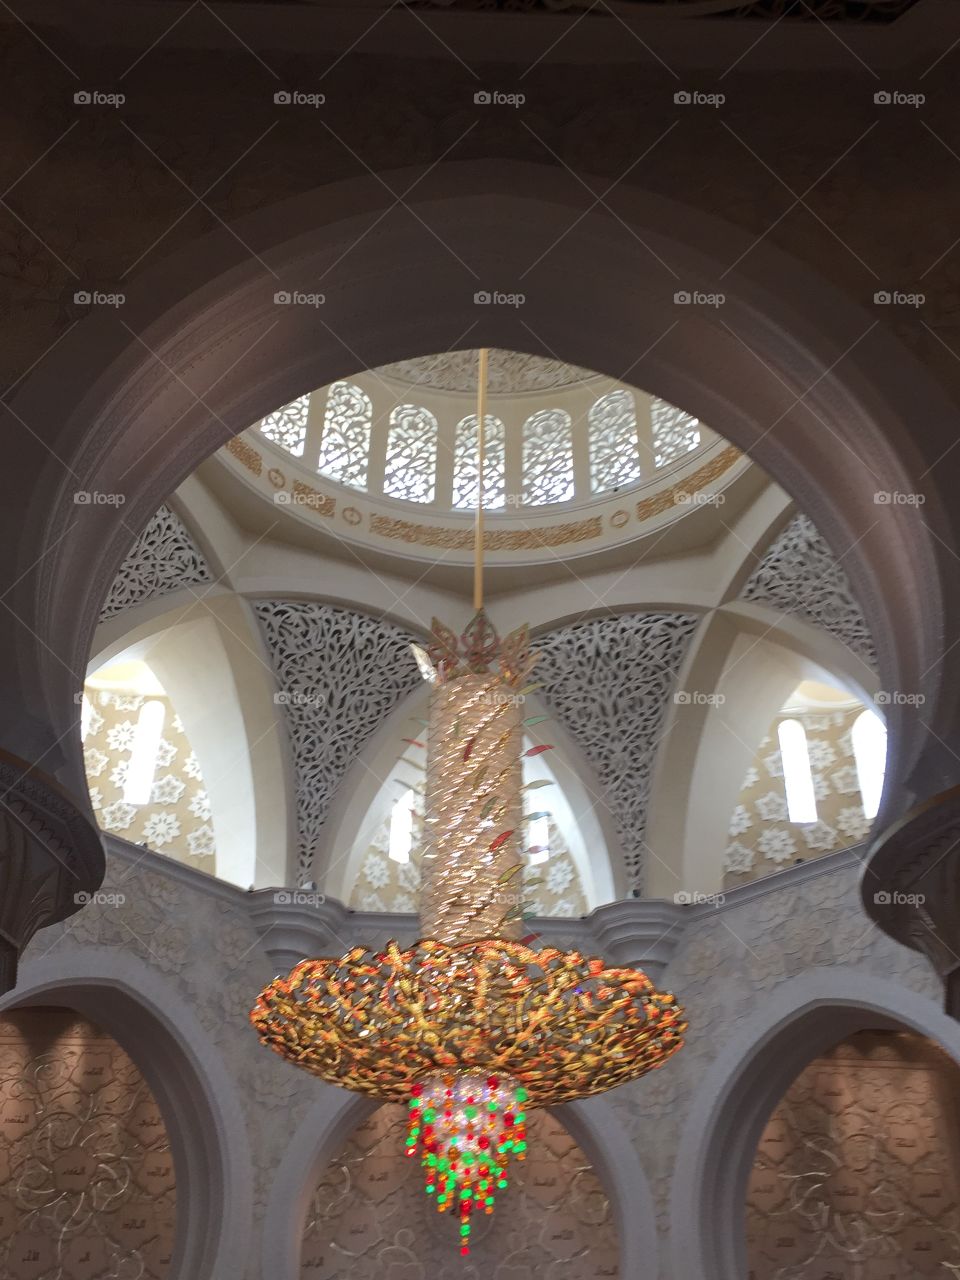 Chandelier mosque ornate colourful beautiful intricate roof dome Abu Dhabi Middle East 